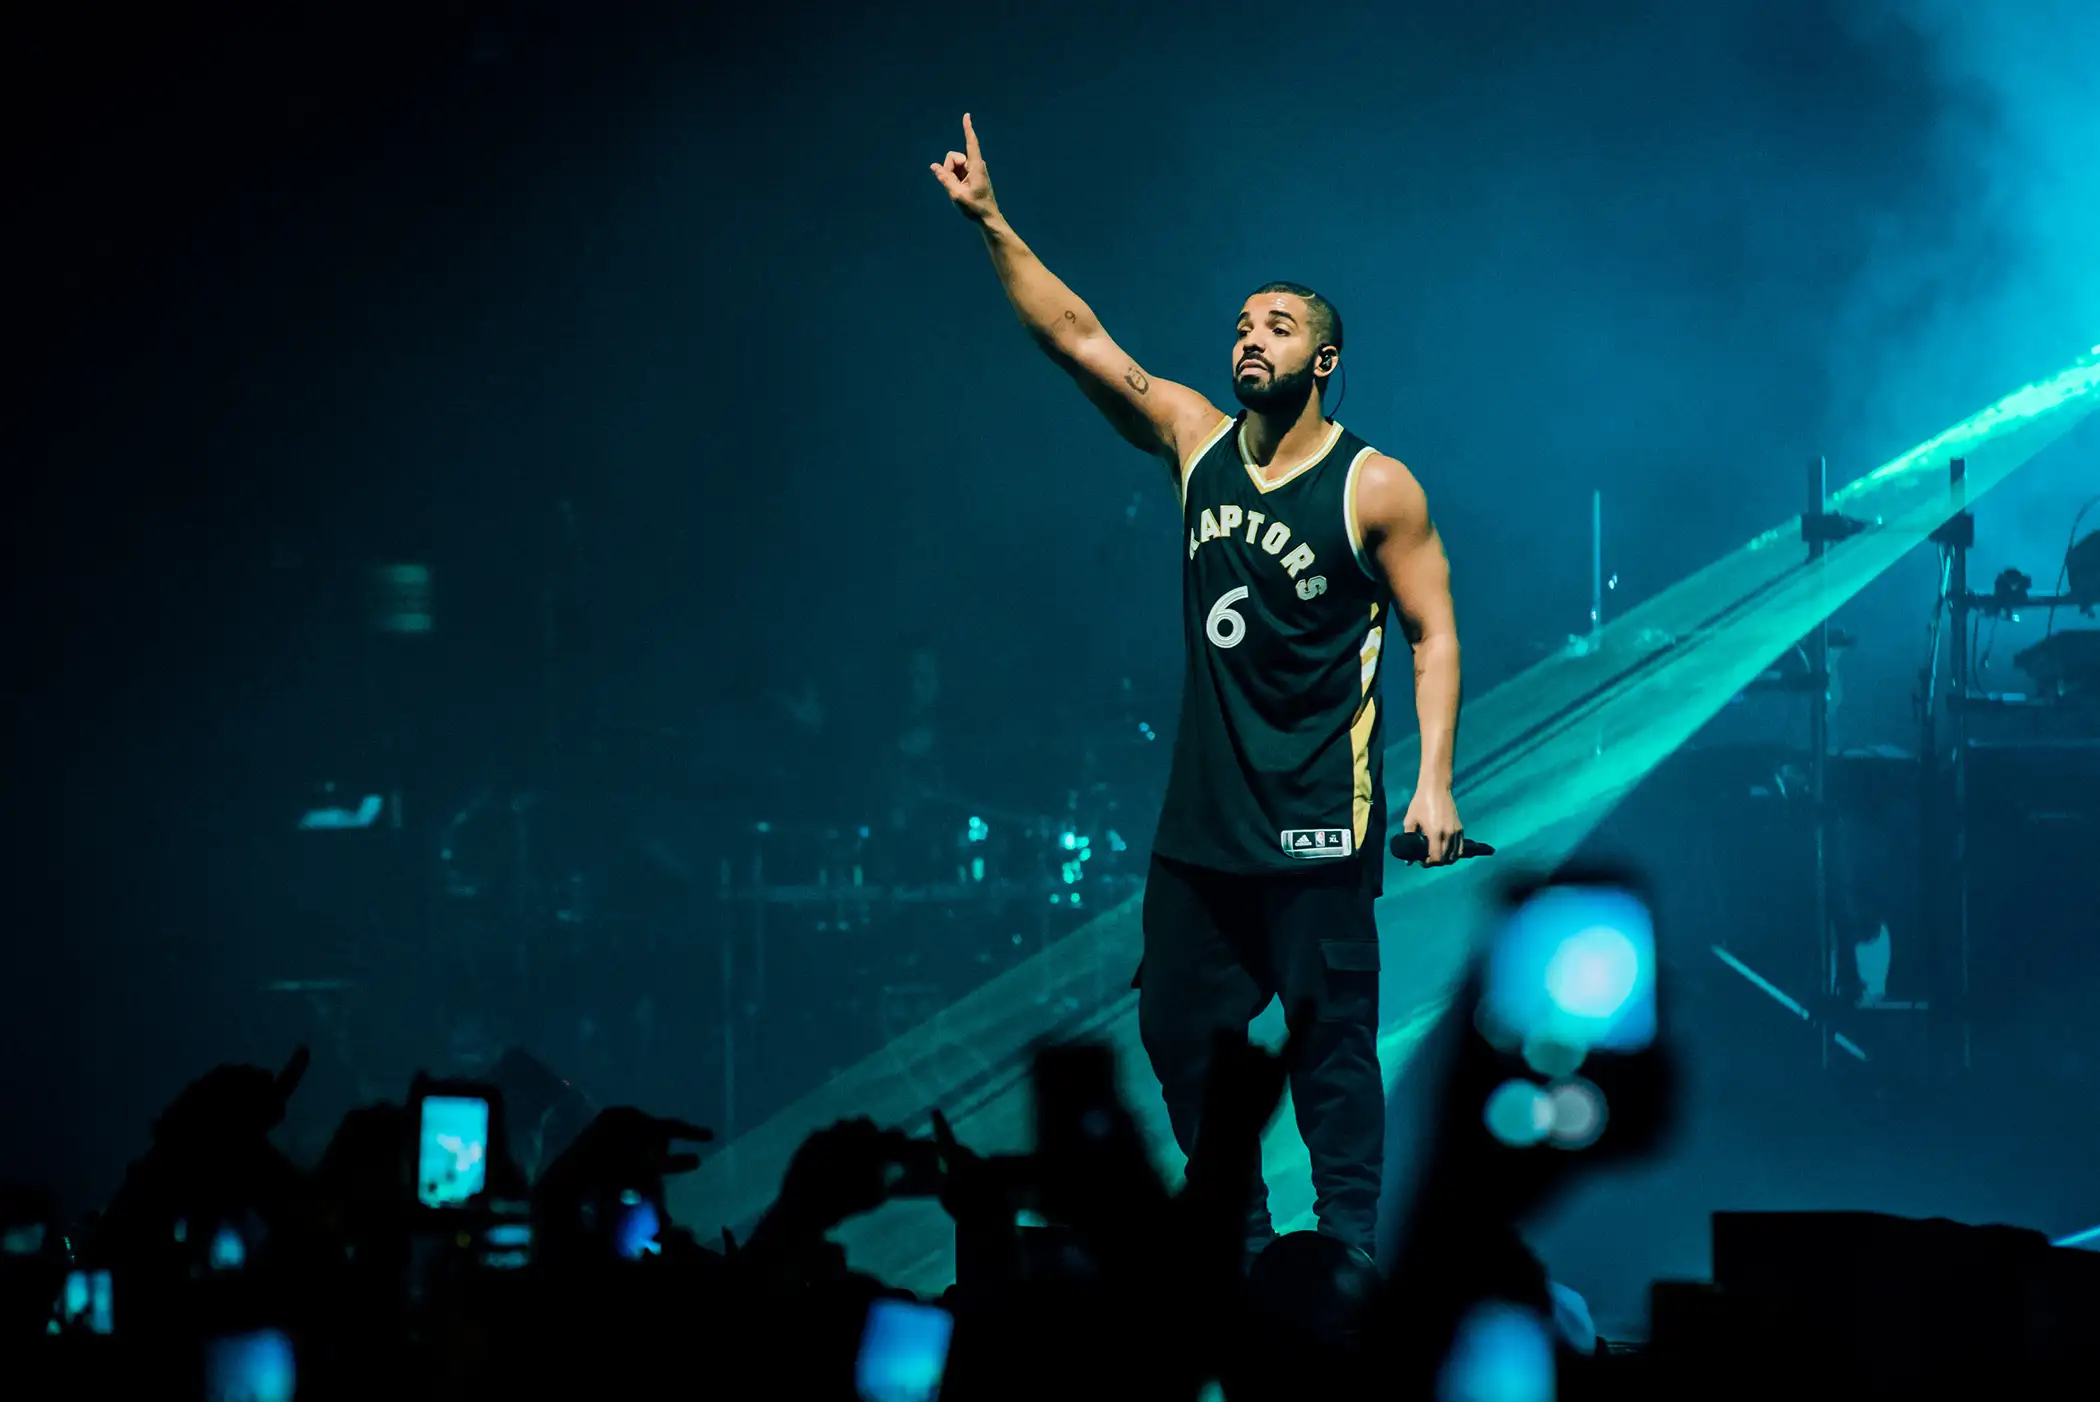 Drake perfrrms during 2015 OVO Fest at Molson Canadian Amphitheatre on August 3, 2015 in Toronto, Canada.